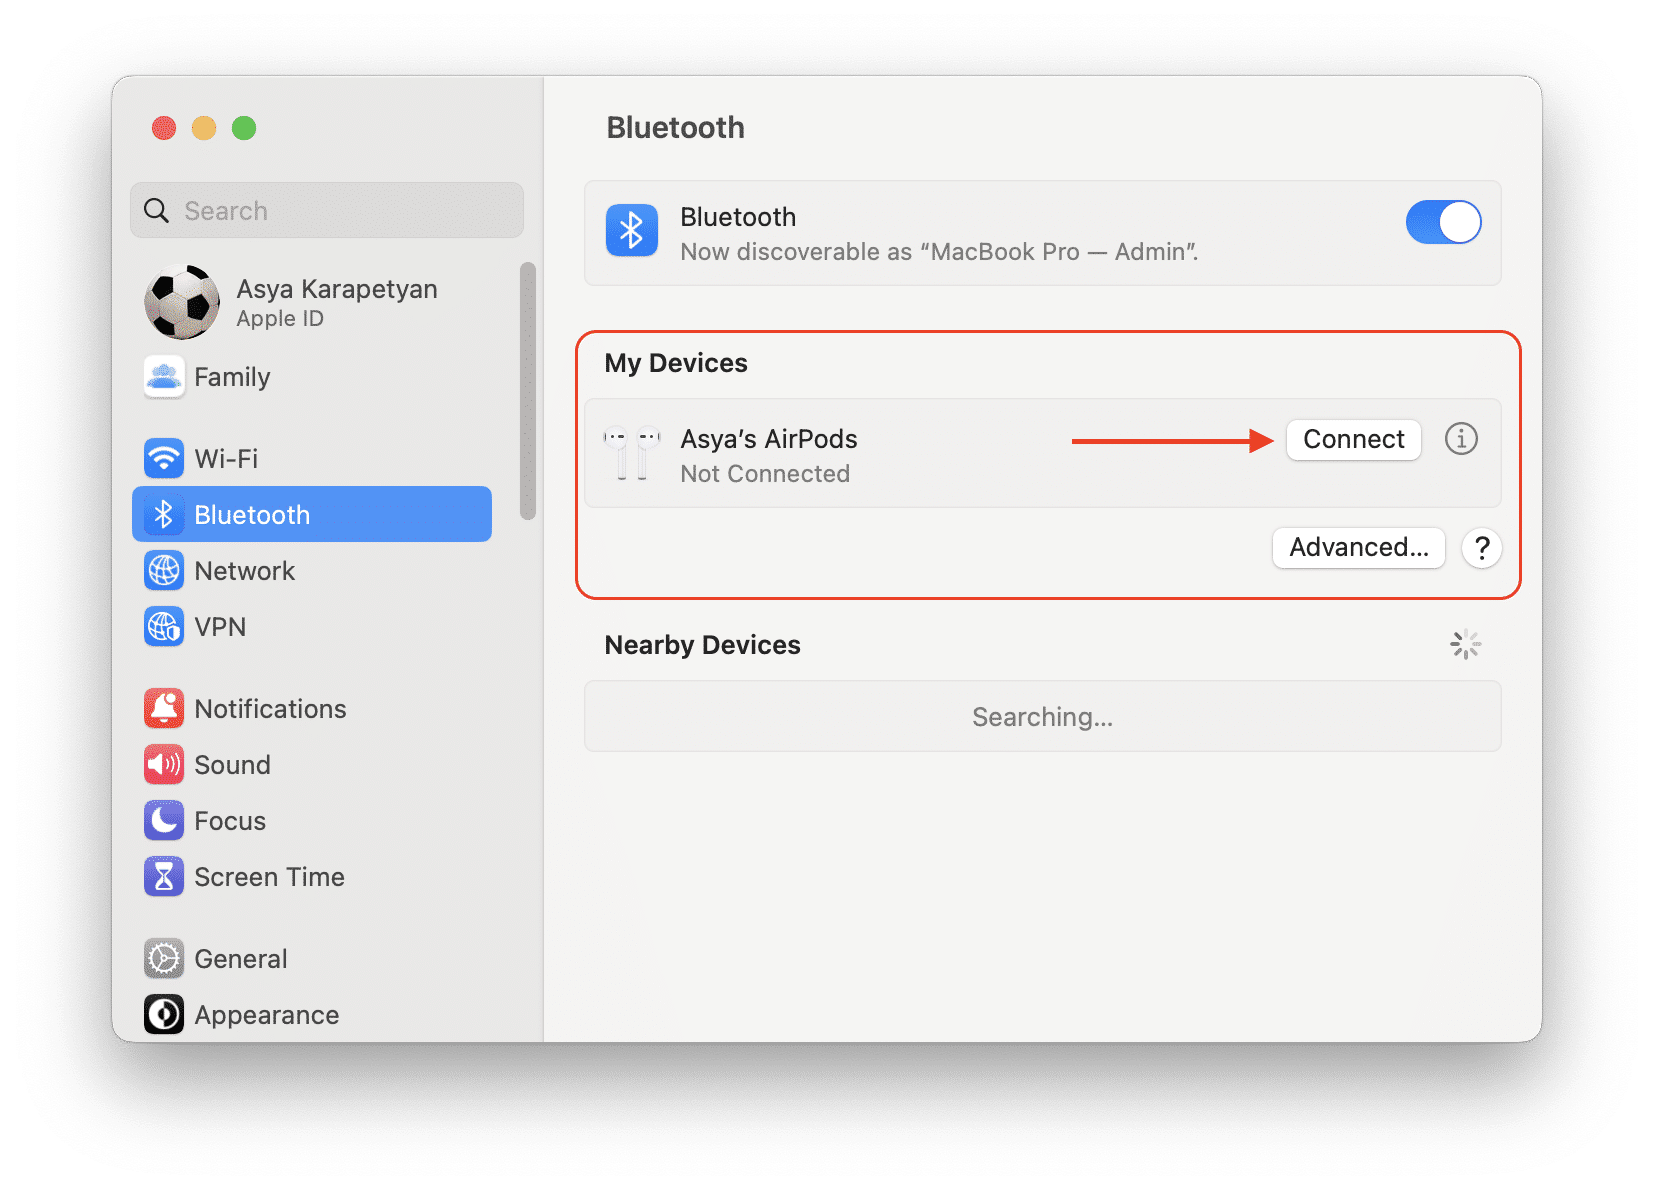 Bluetooth settings window showing devices to connect